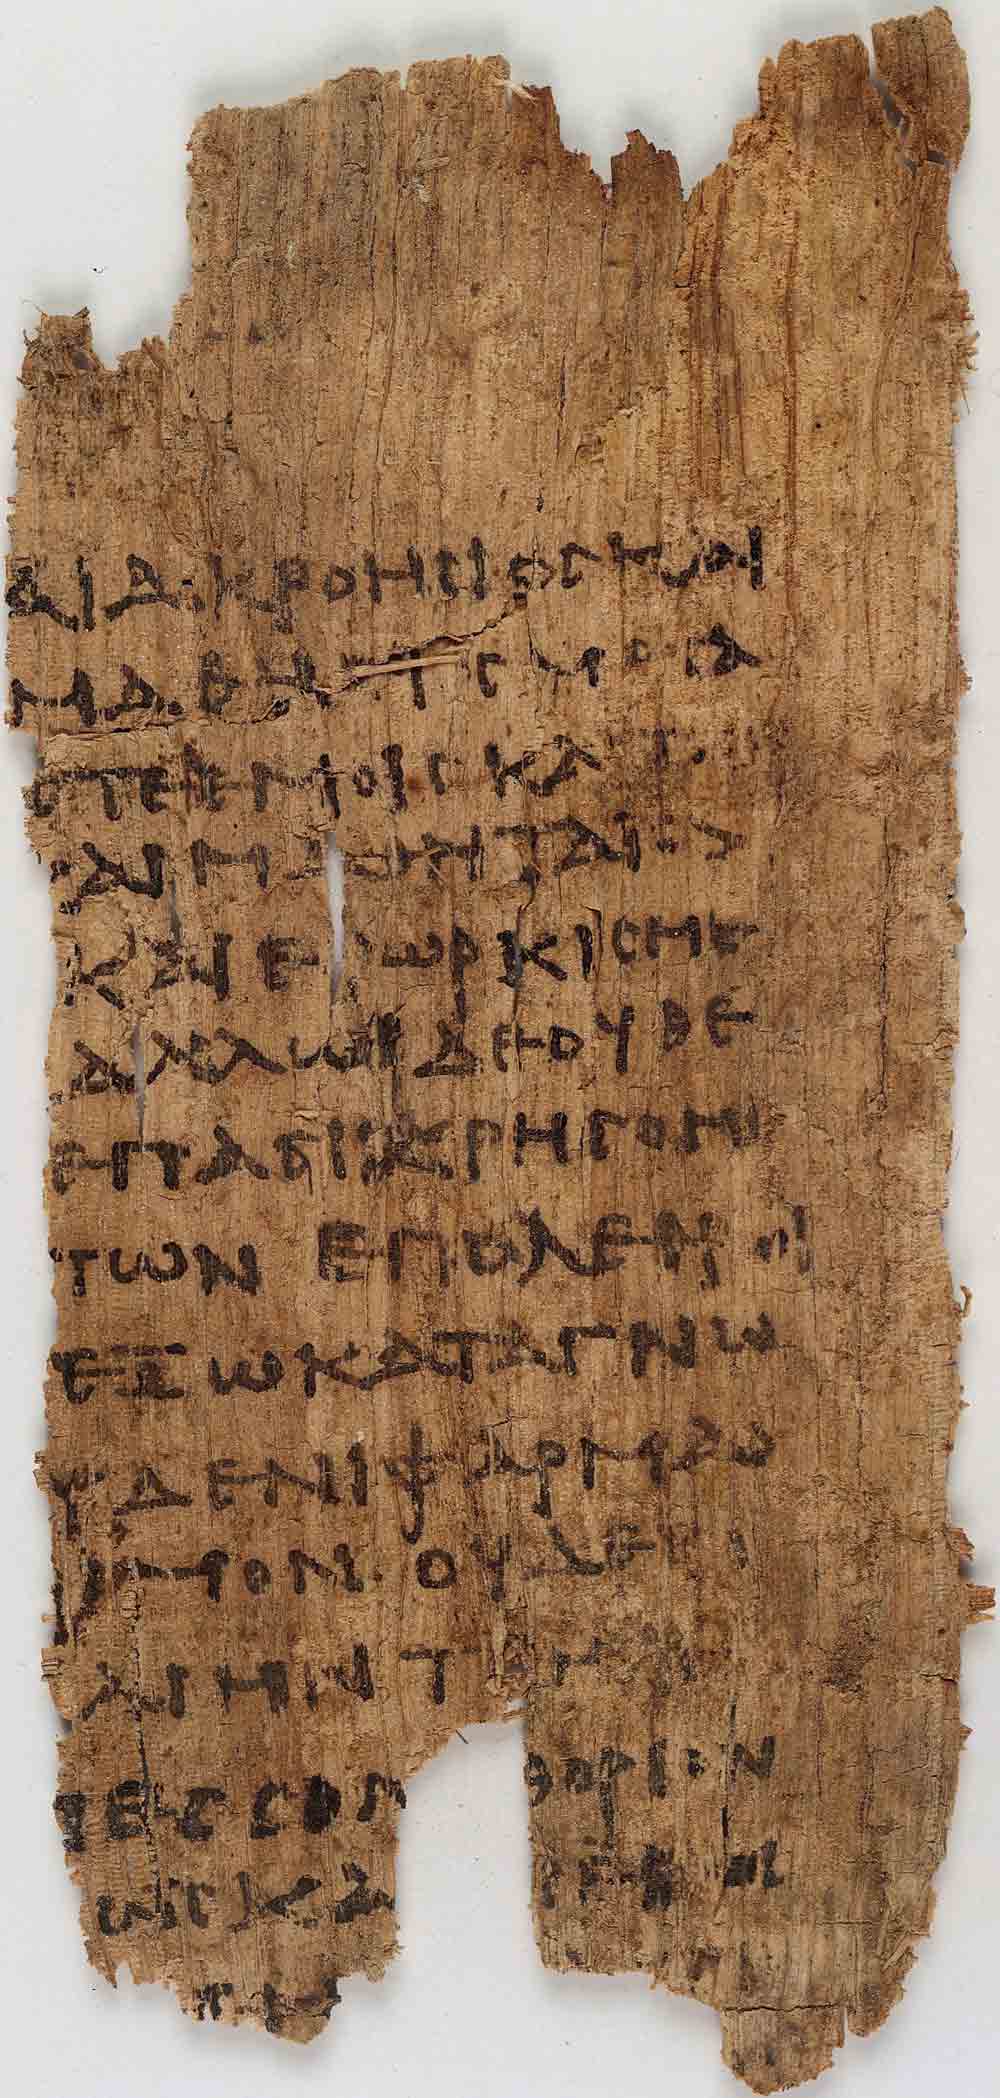 Papyrus text: fragment of Hippocratic oath.